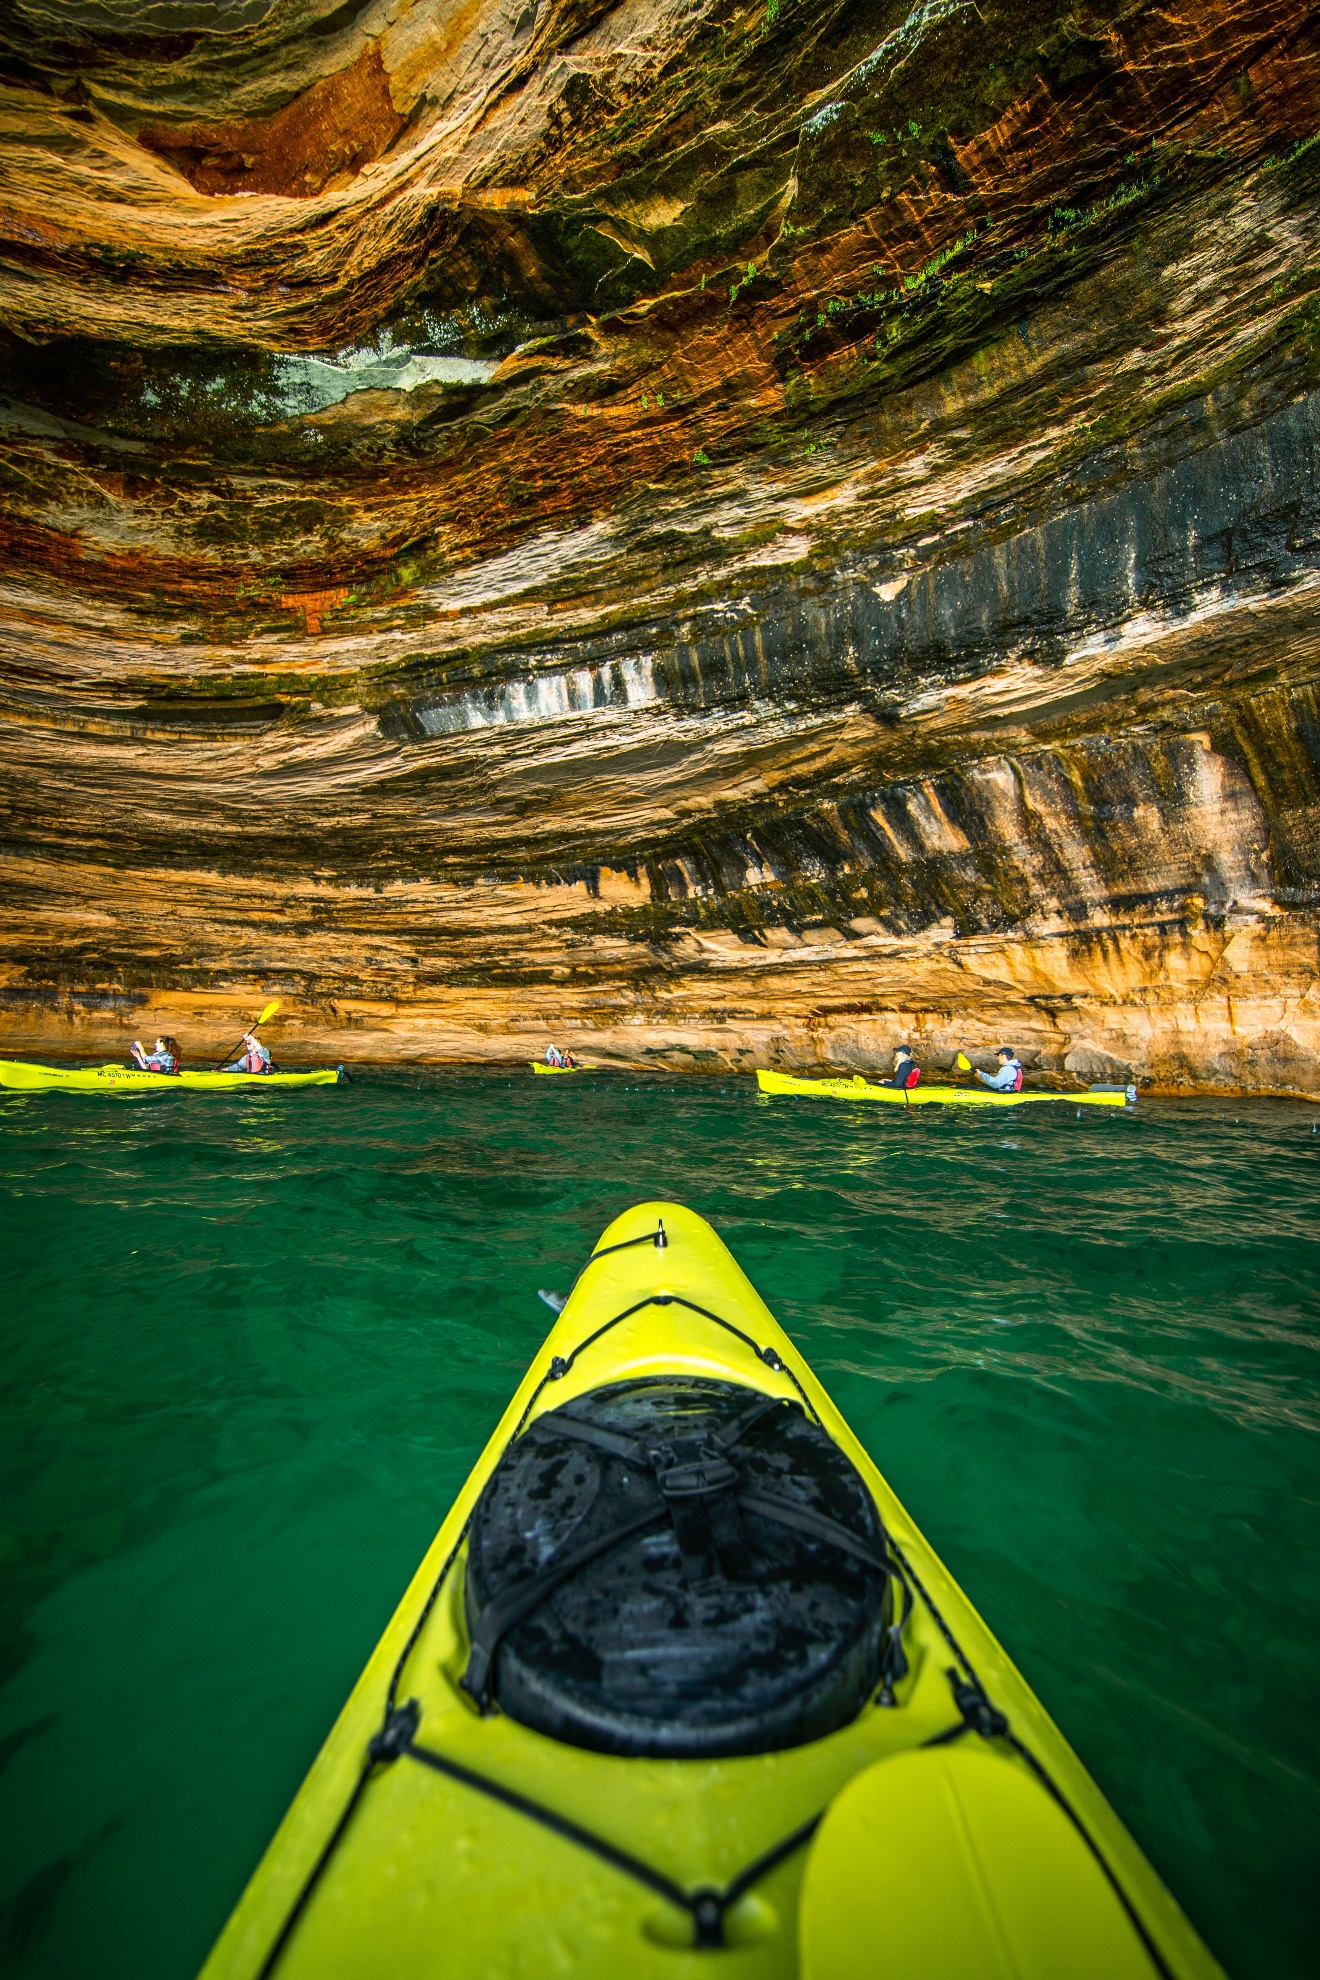 Paddle Through Sea Caves at Pictured Rocks